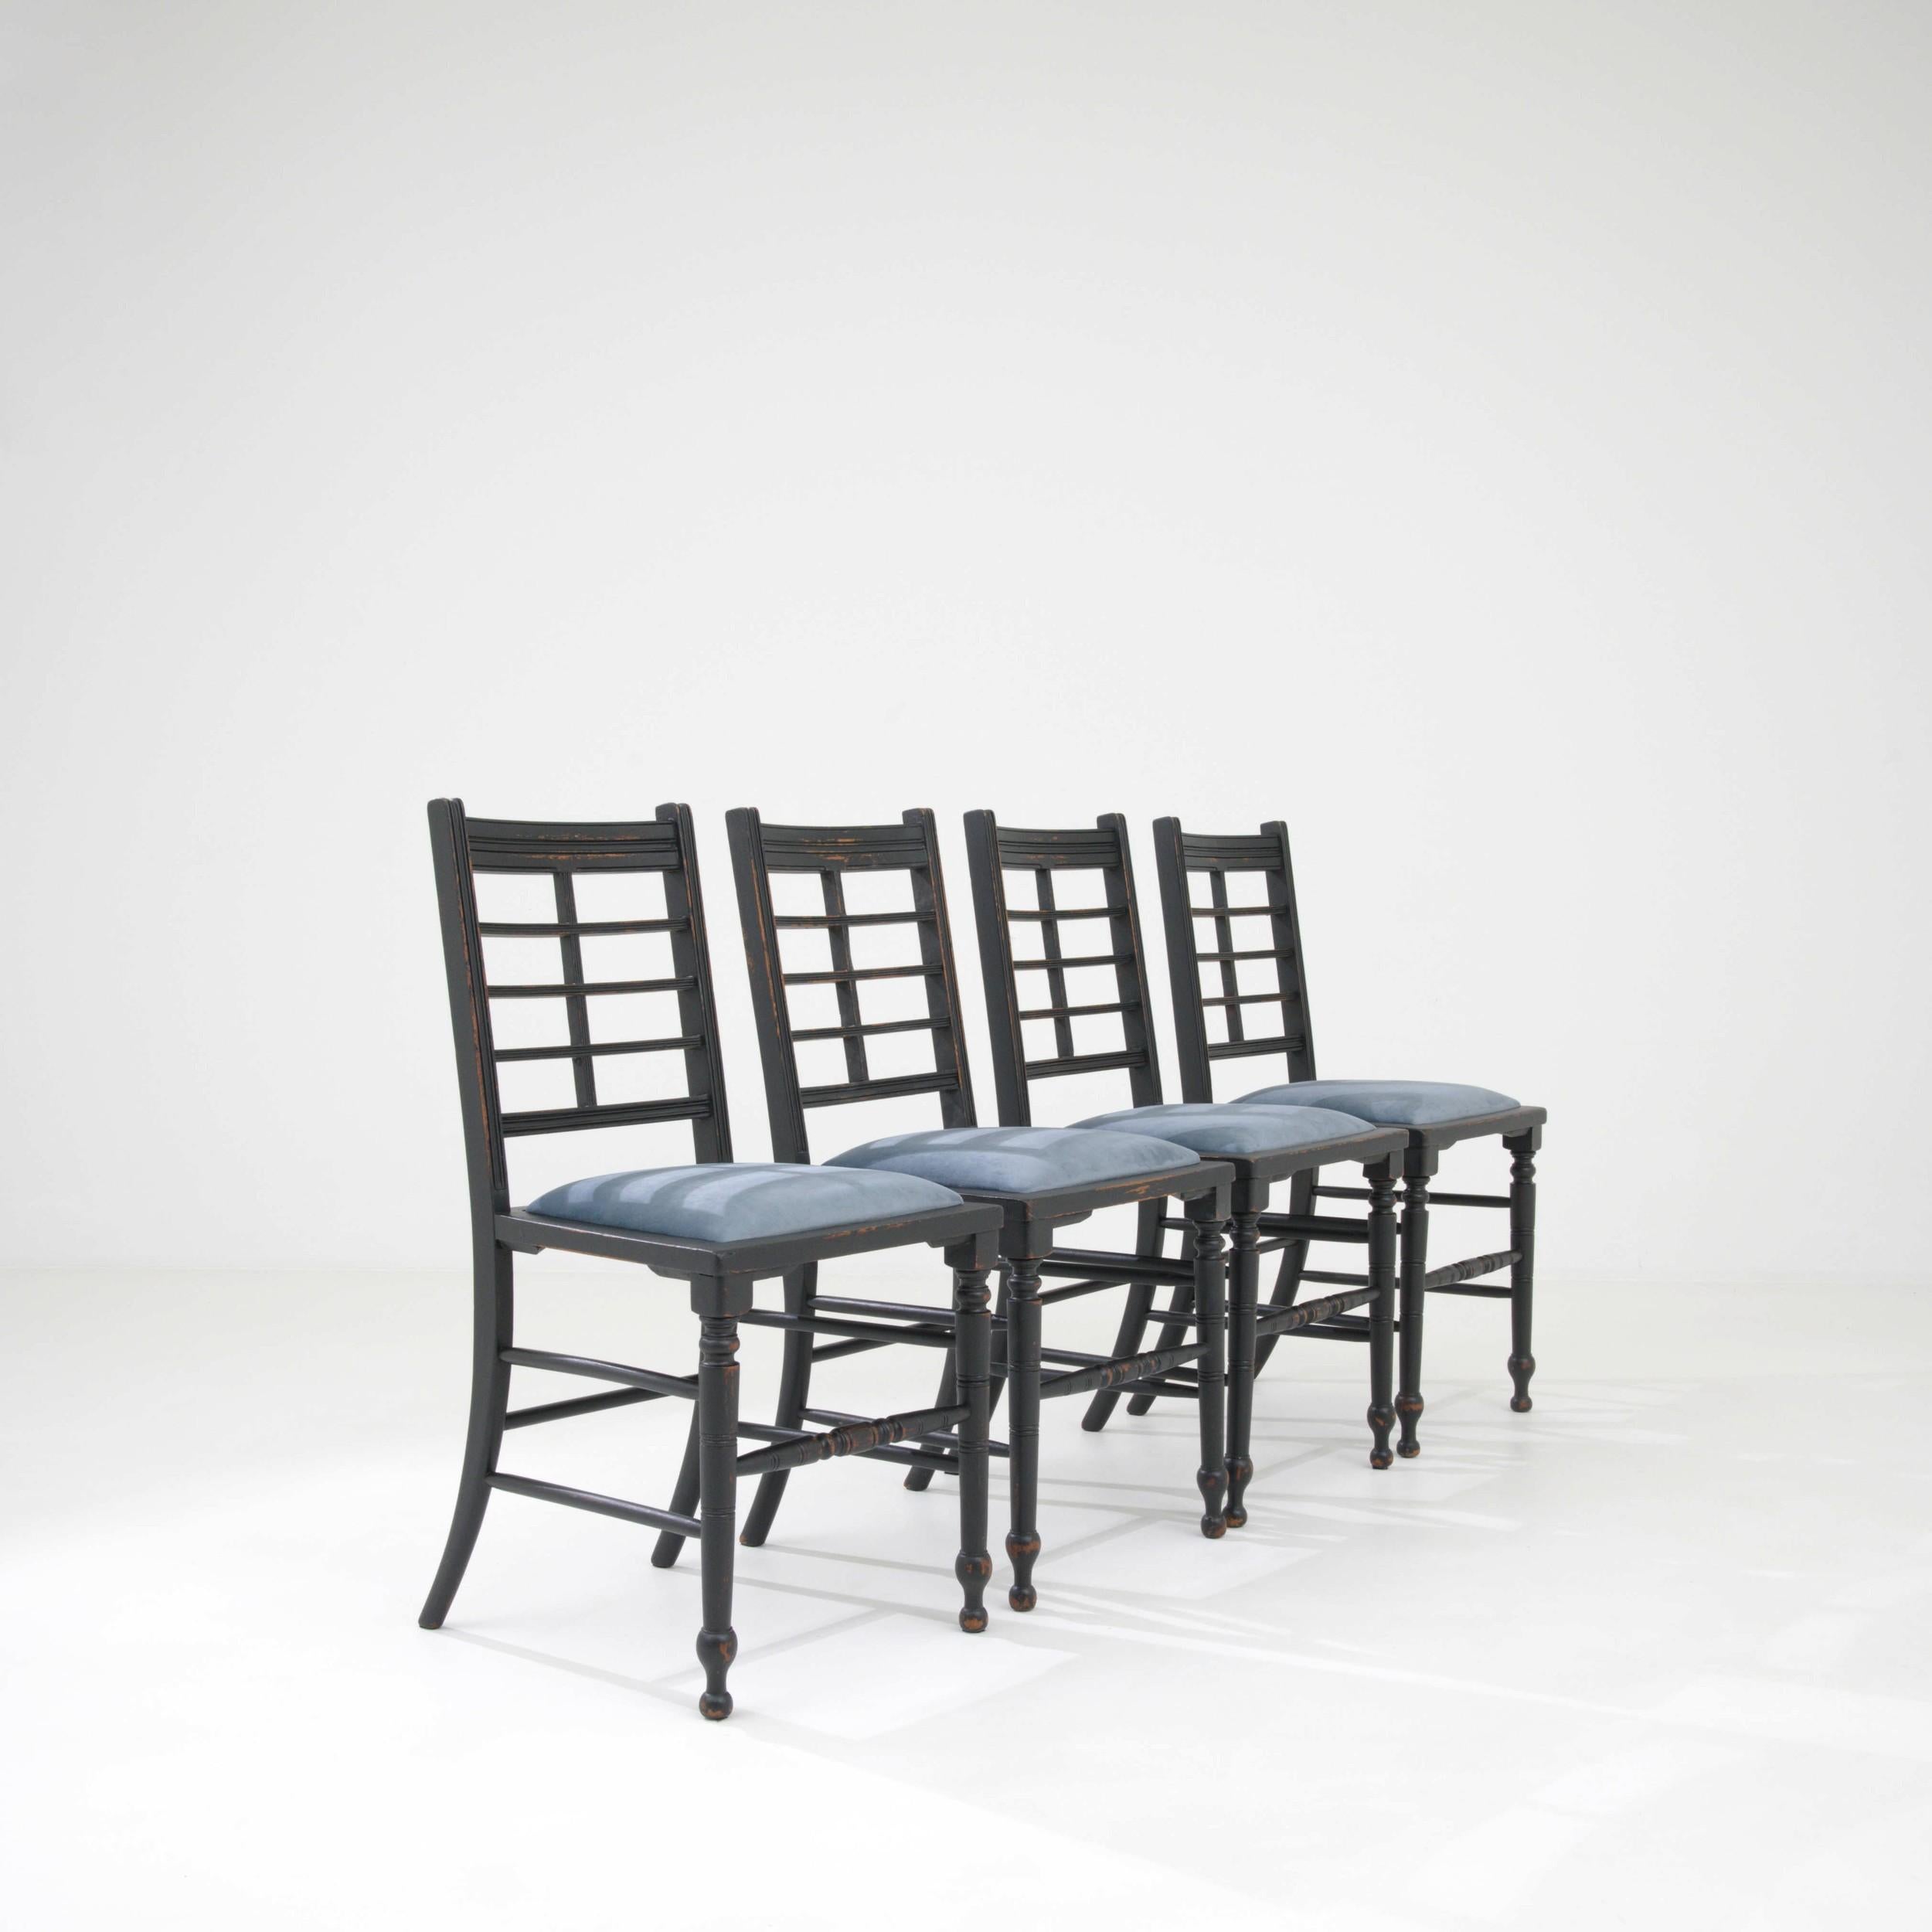 Made in the United Kingdom in the 19th Century, this set of four chairs is made of wood and features an upholstered cushion. Finished in black, the refined style of these chairs lends them to the dining room, or on their own as a visual accent. The